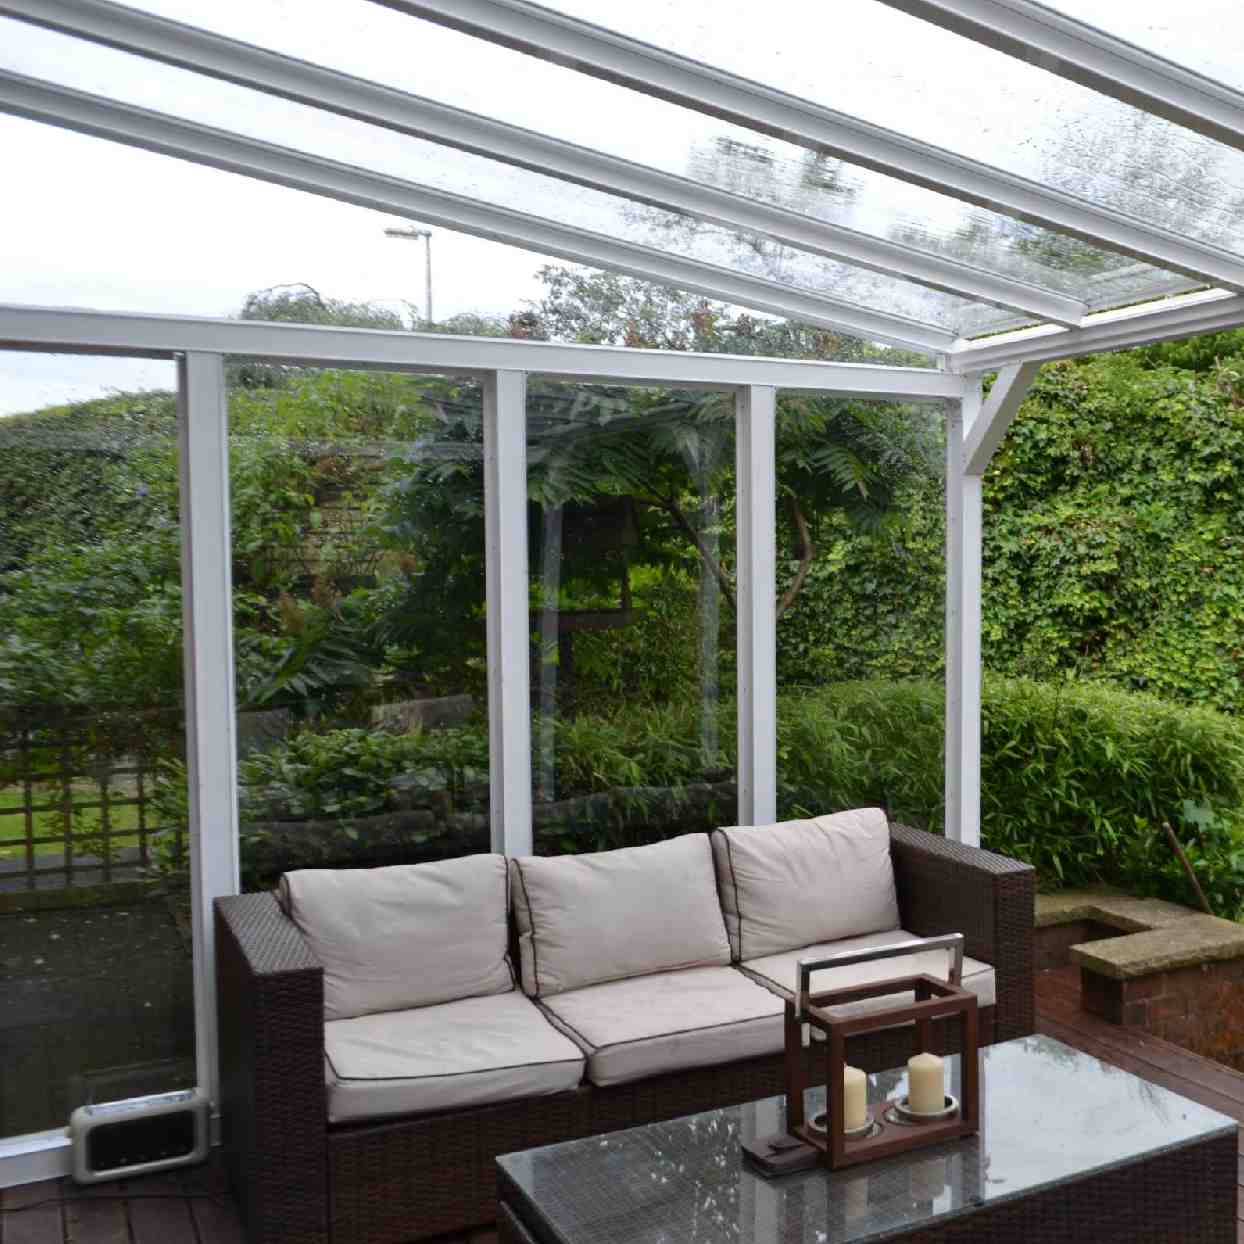 Buy Omega Verandah White with 16mm Polycarbonate Glazing - 10.2m (W) x 4.5m (P), (5) Supporting Posts online today